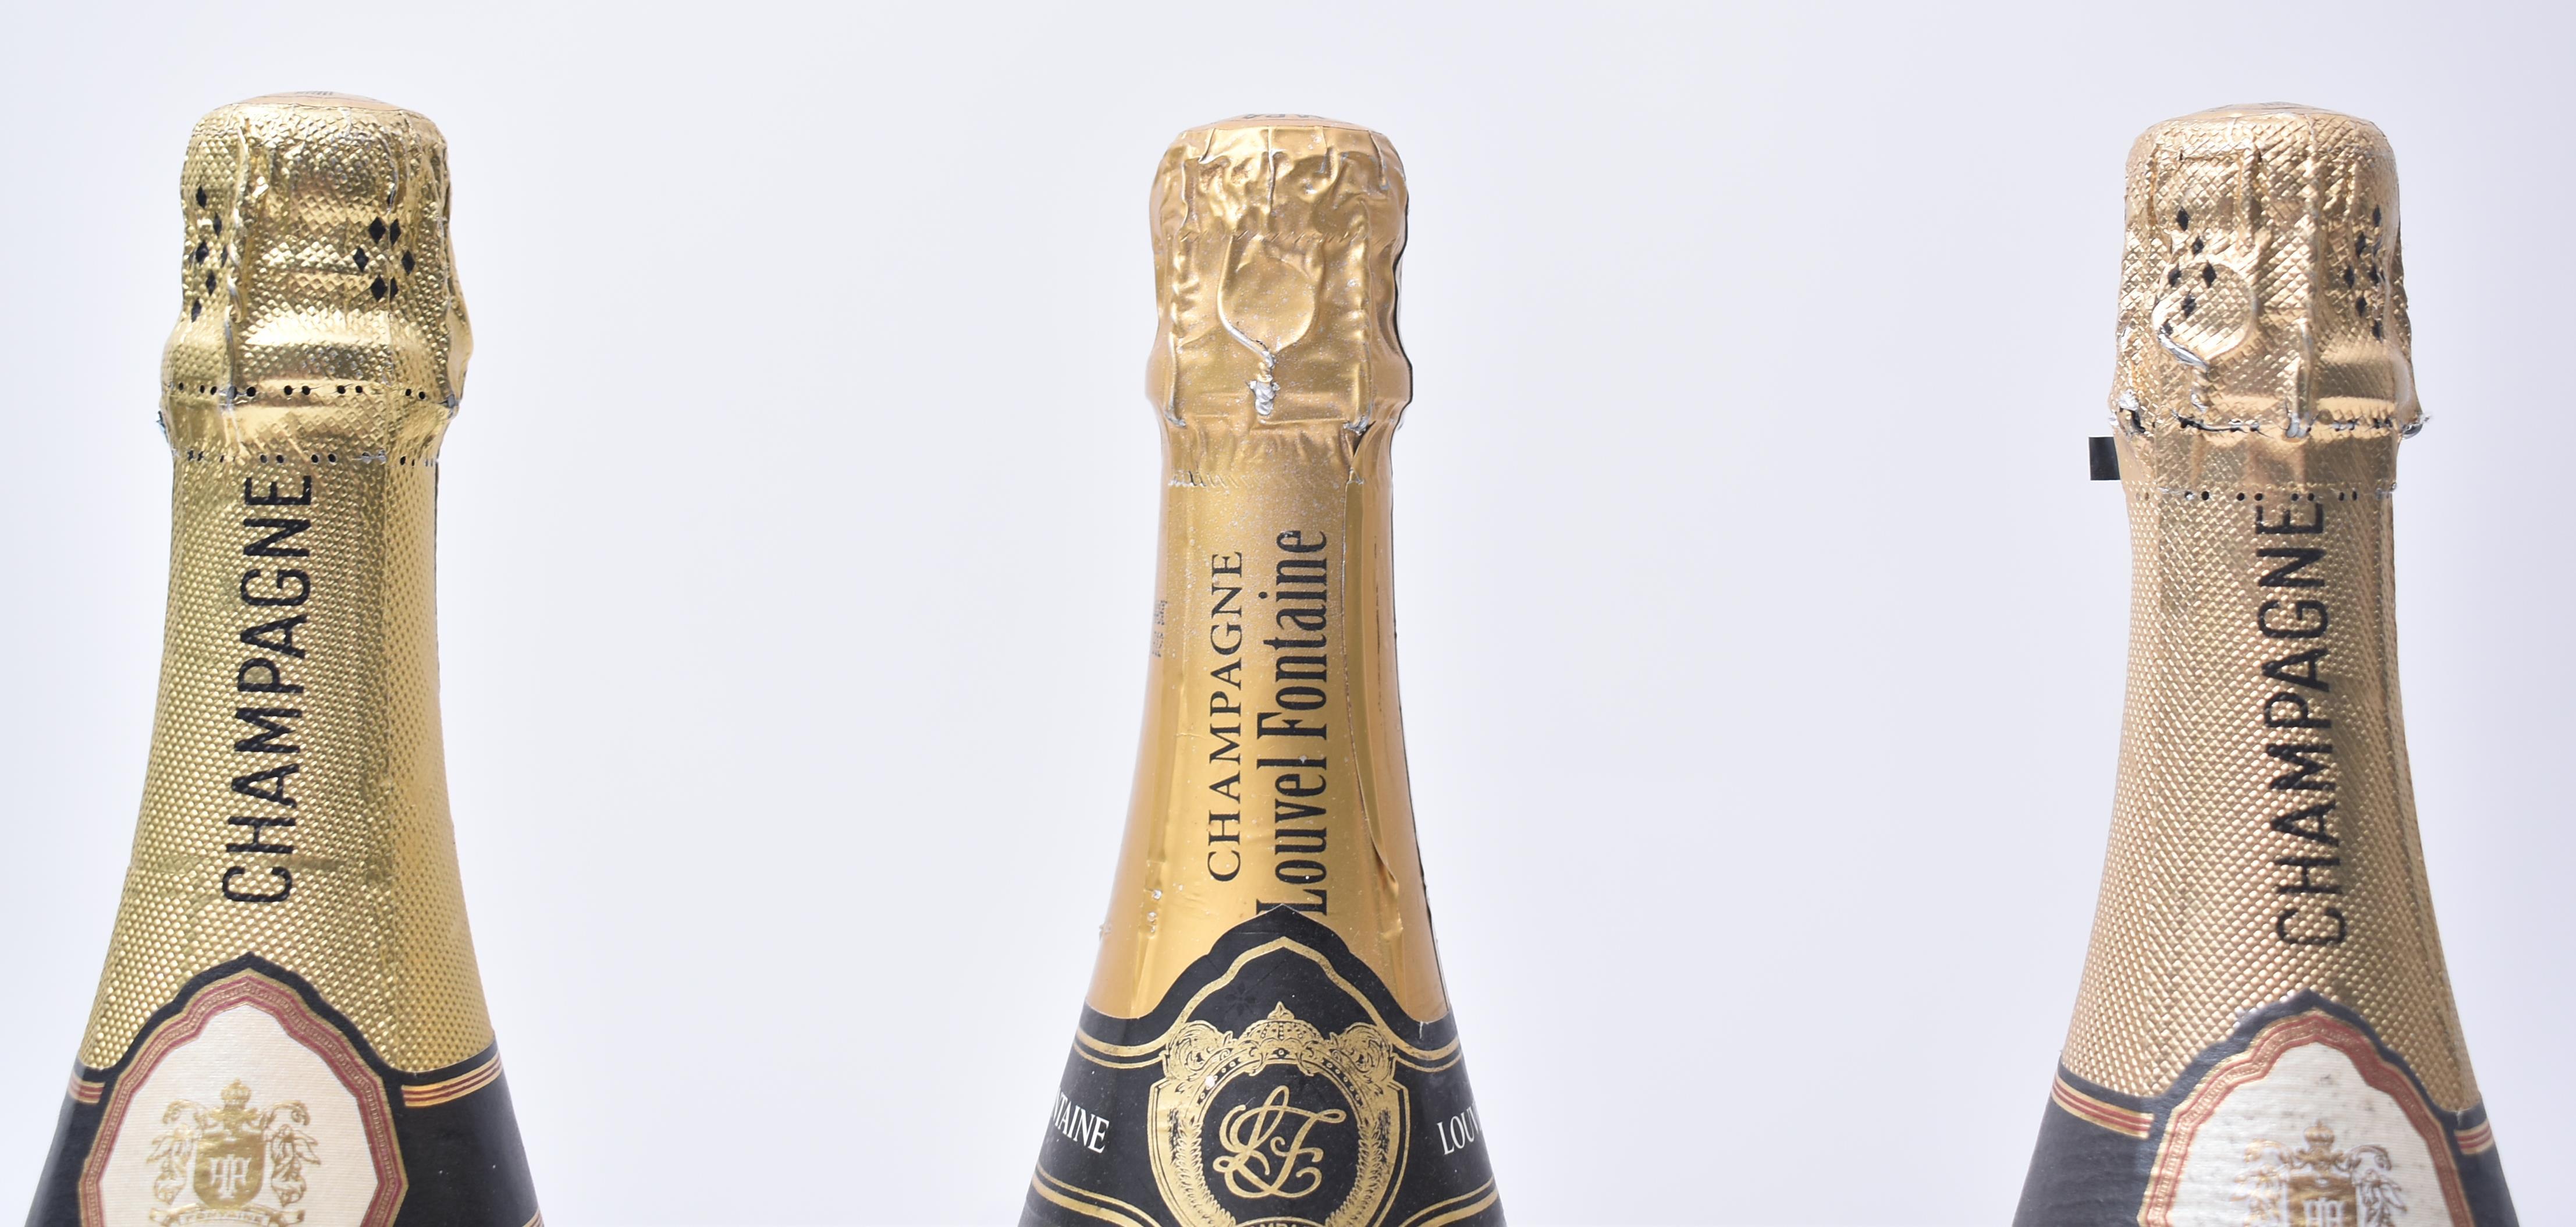 THREE LOUVEL FONTAINE BRUT CHAMPAGNE BOTTLE - Image 2 of 3